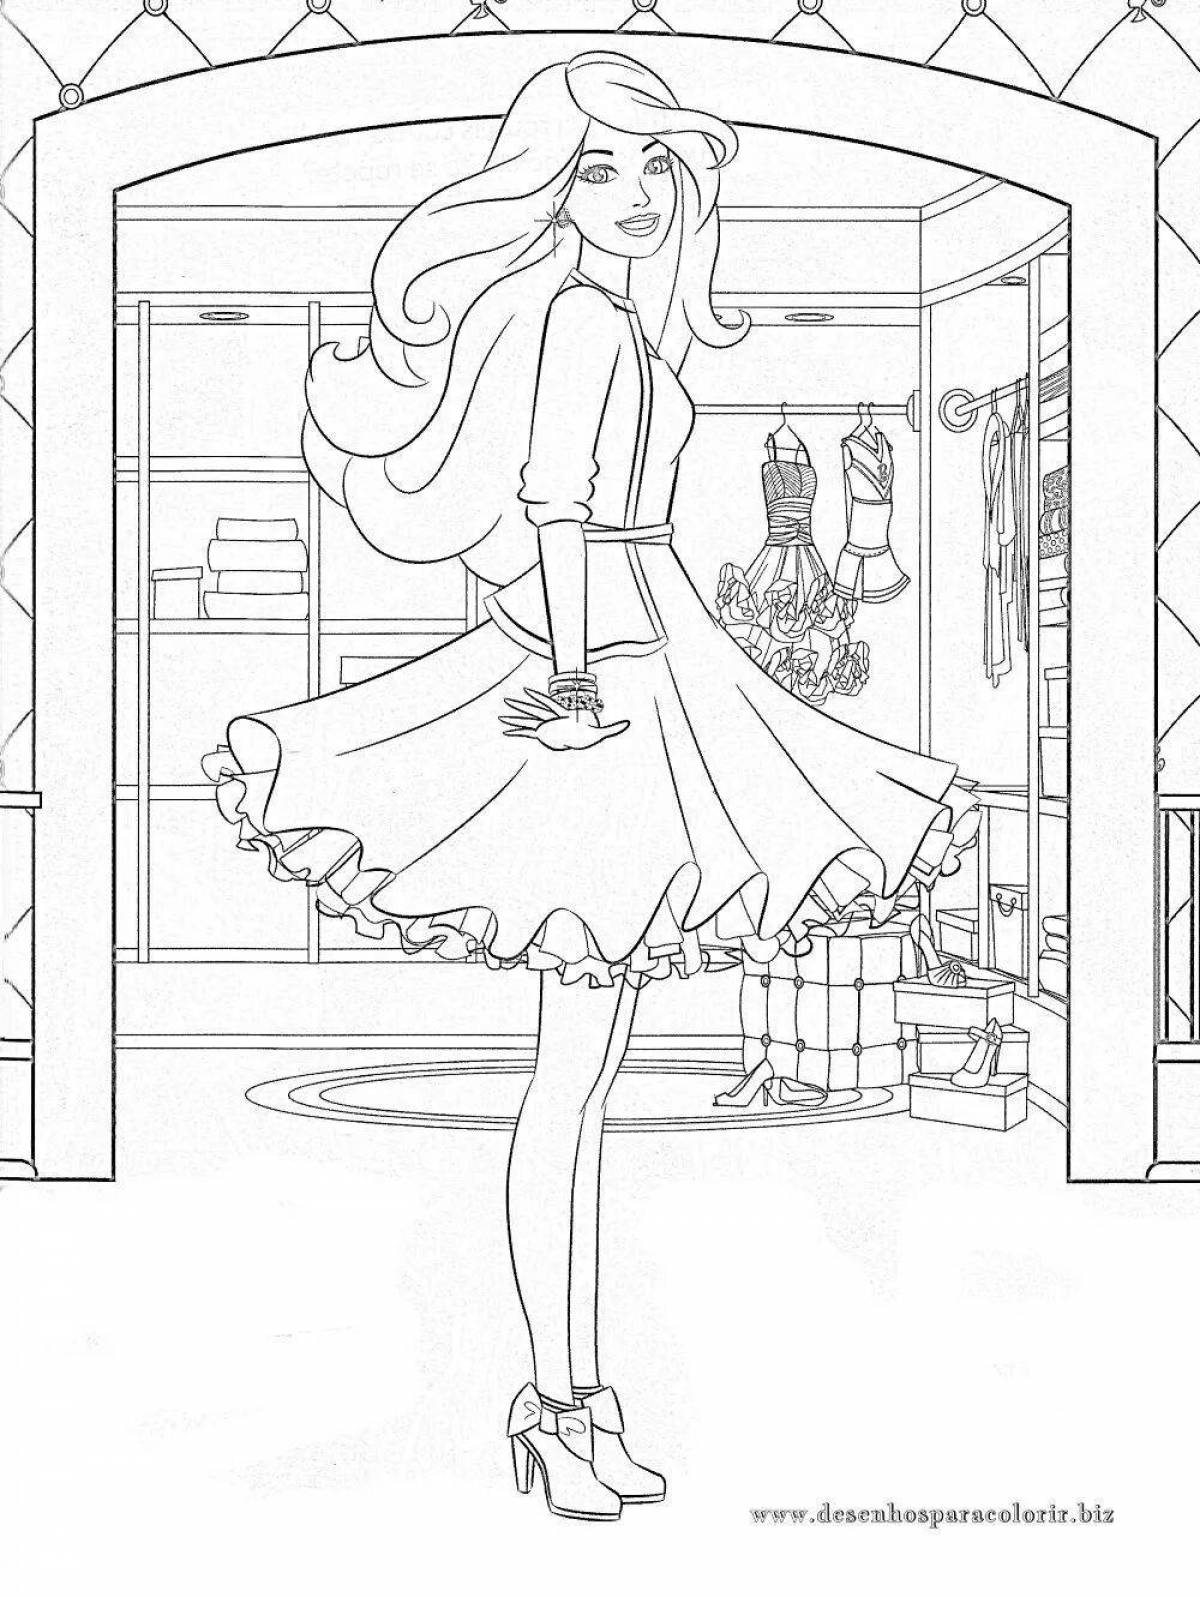 Coloring page joyful barbie with a projector